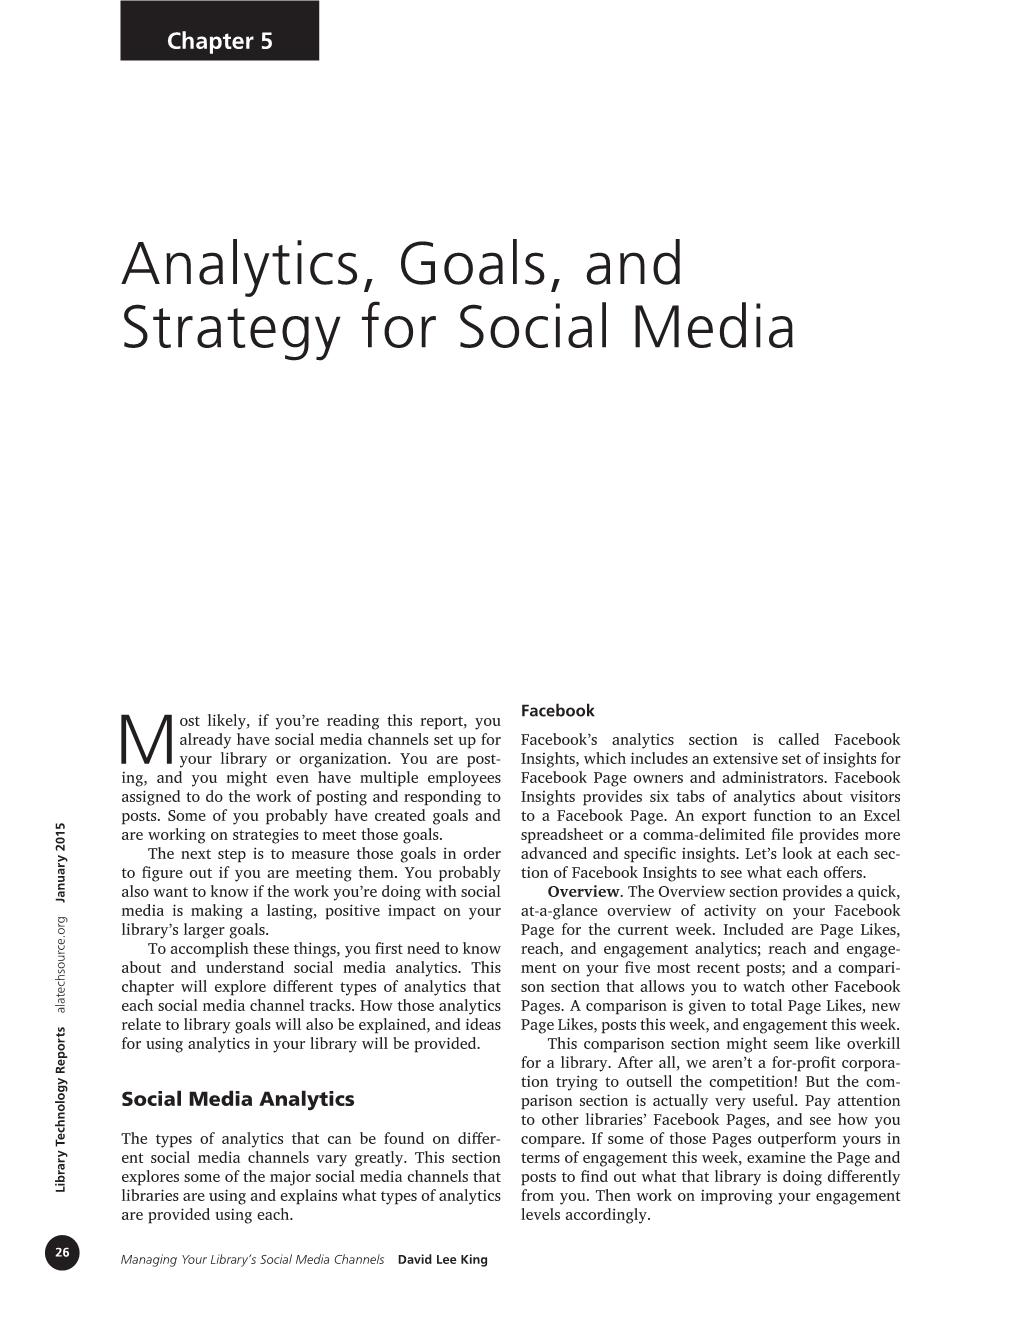 Analytics, Goals, and Strategy for Social Media